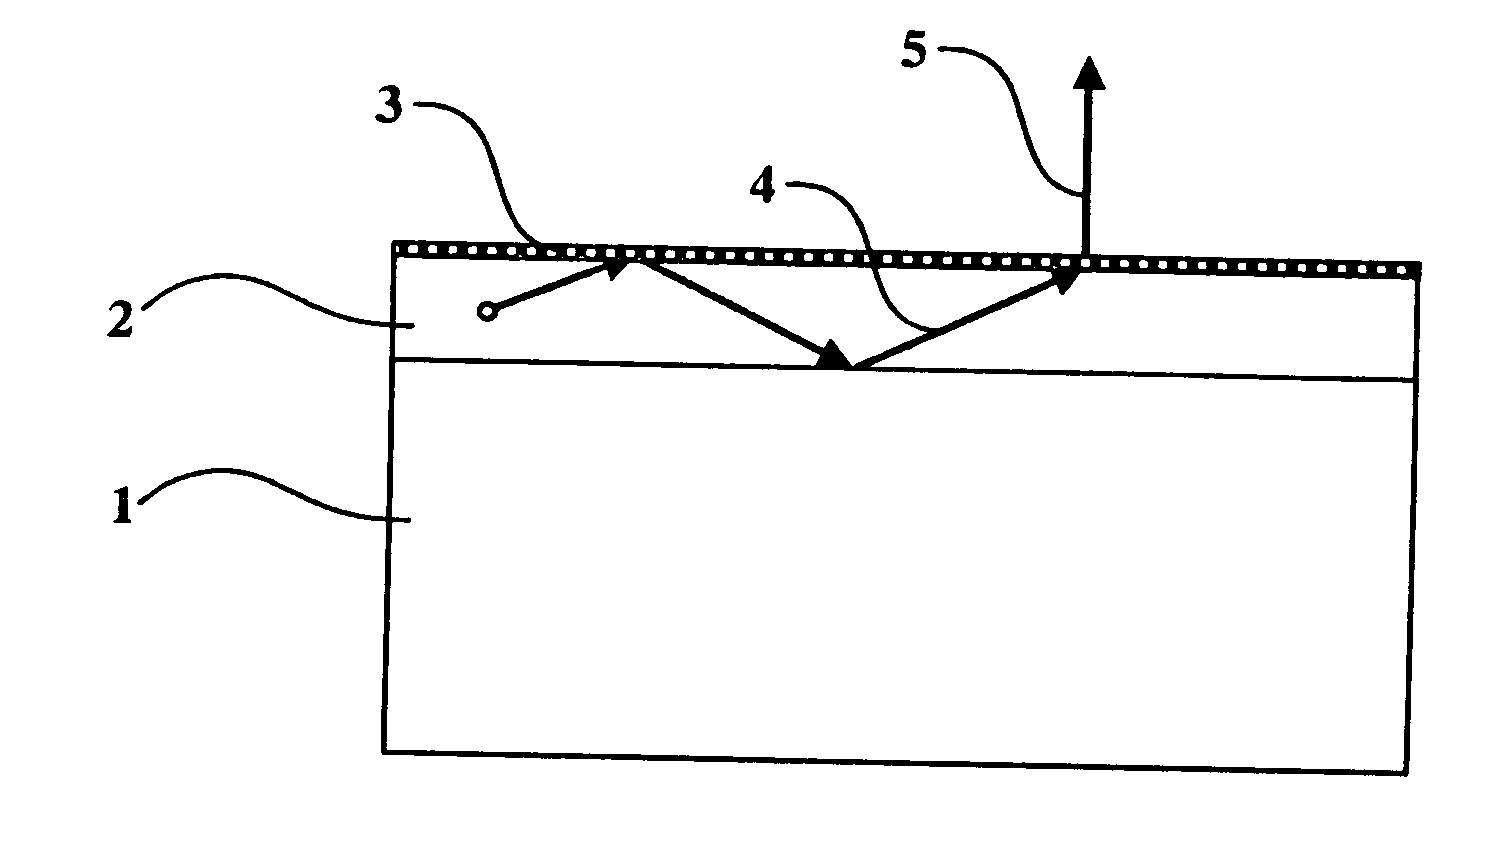 Light emitting diode with diffraction lattice